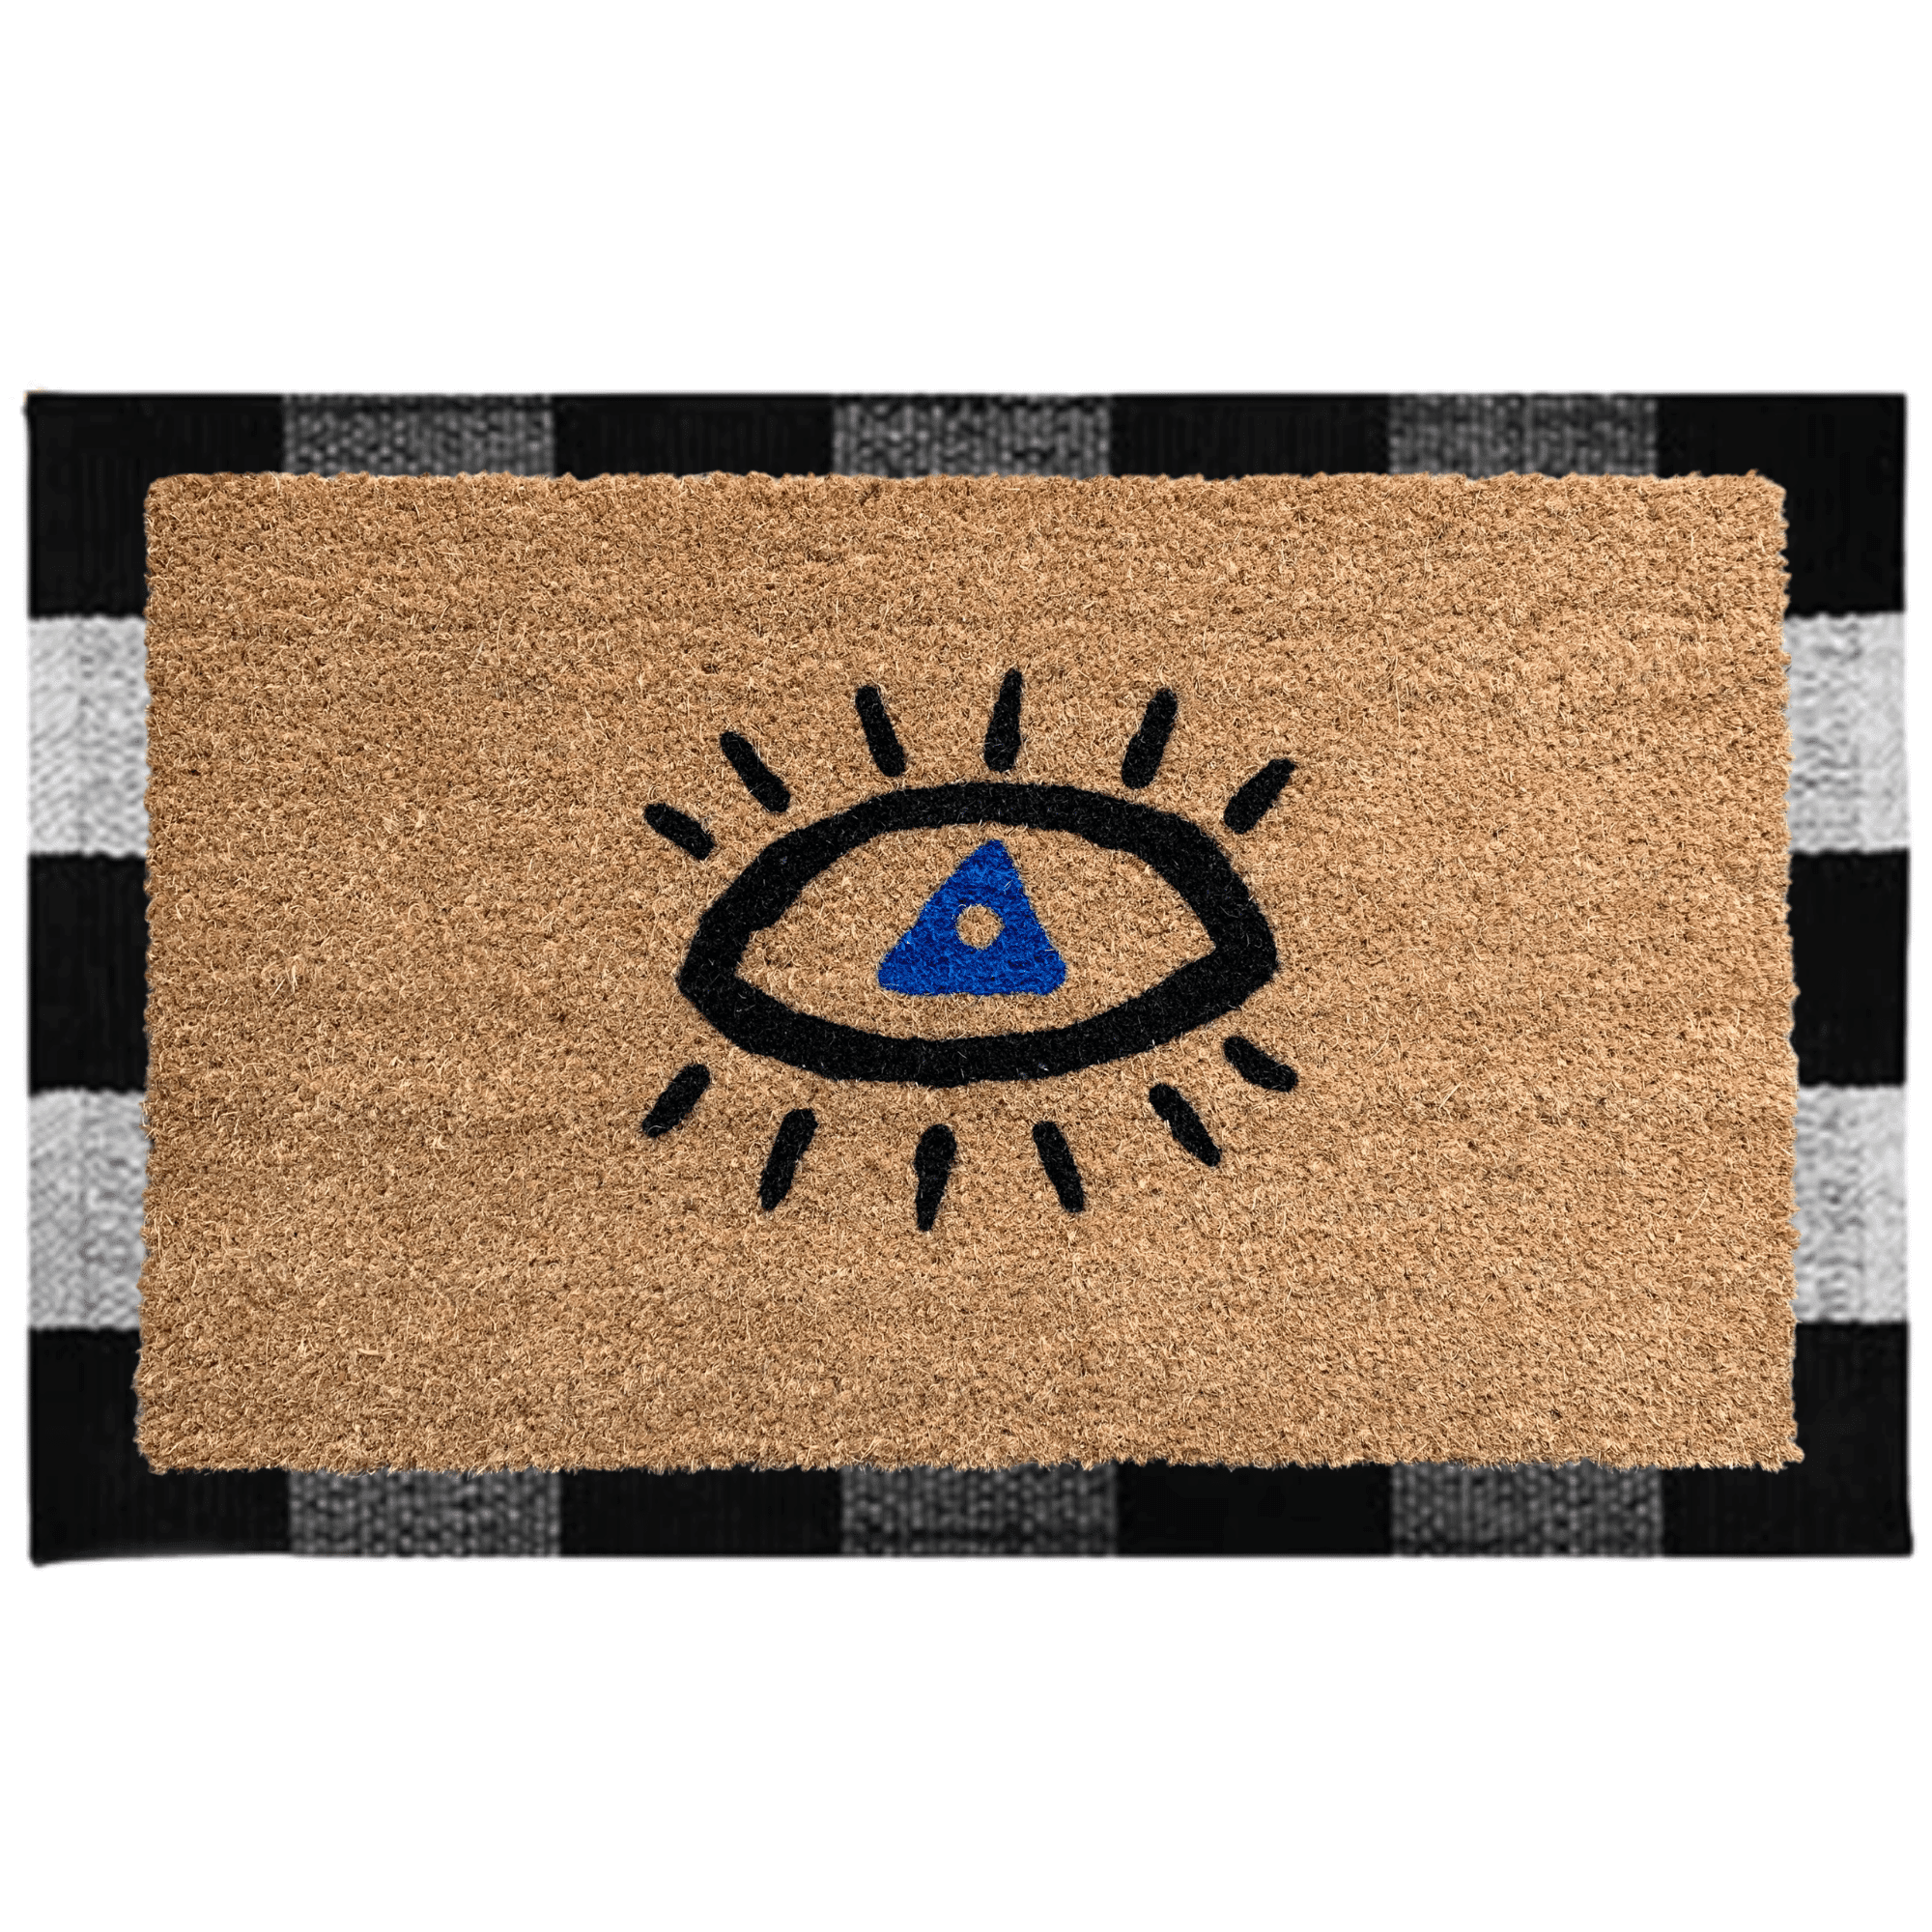 Black Gold Style Personalized Creative Door Mat Anti-Slip Rubber Bottom Rug Home Decoration Bedroom Decoration Funny Rug Suitable for Any Area in The Room 16×24inch Evil Eye Doormat 